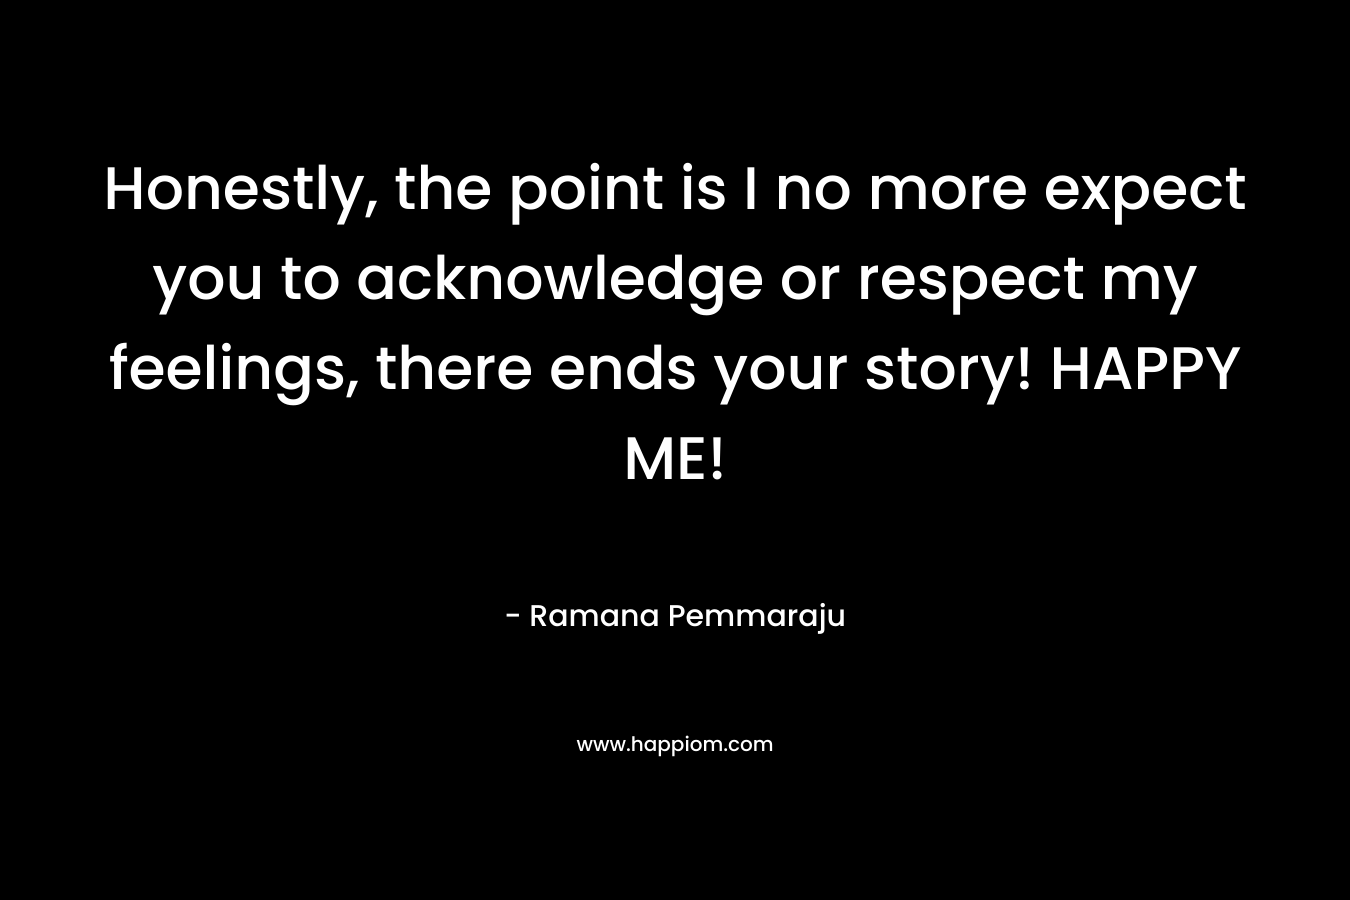 Honestly, the point is I no more expect you to acknowledge or respect my feelings, there ends your story! HAPPY ME! – Ramana Pemmaraju